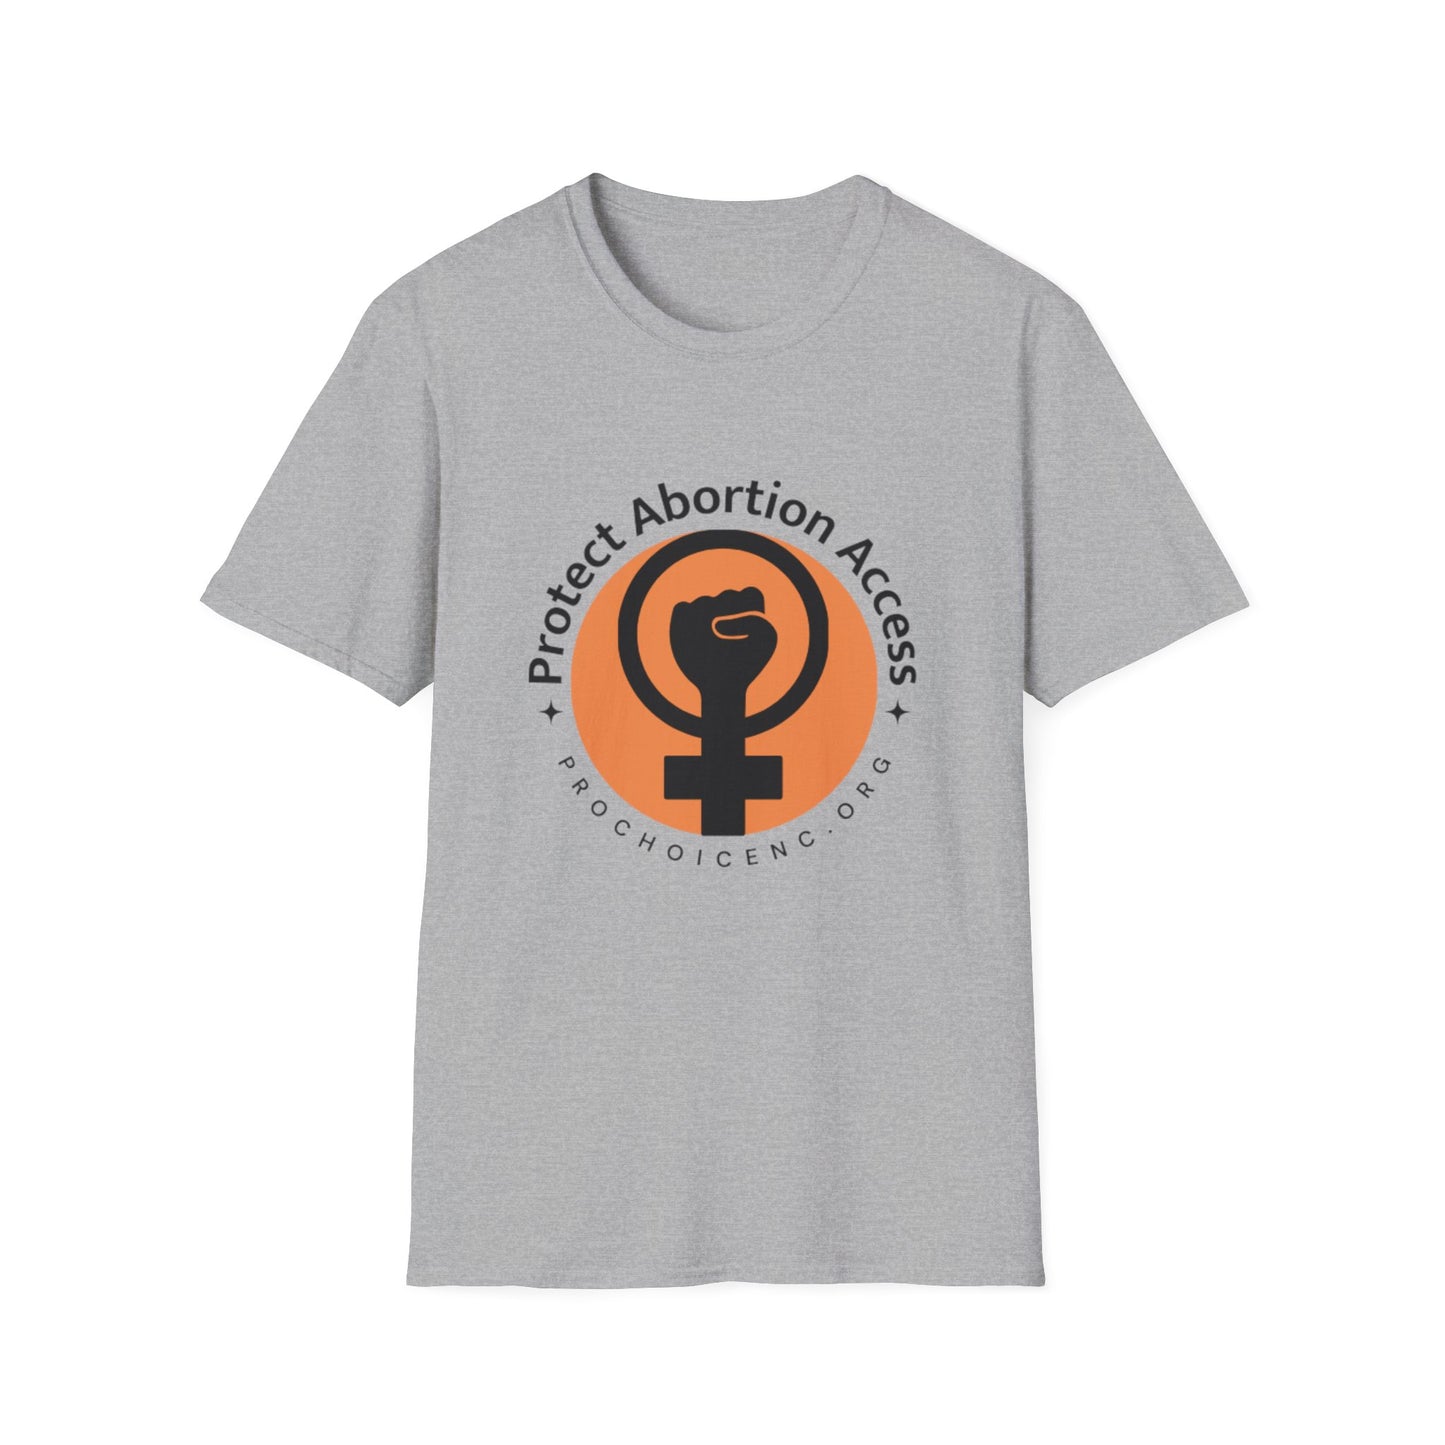 Protect Abortion Access Tee